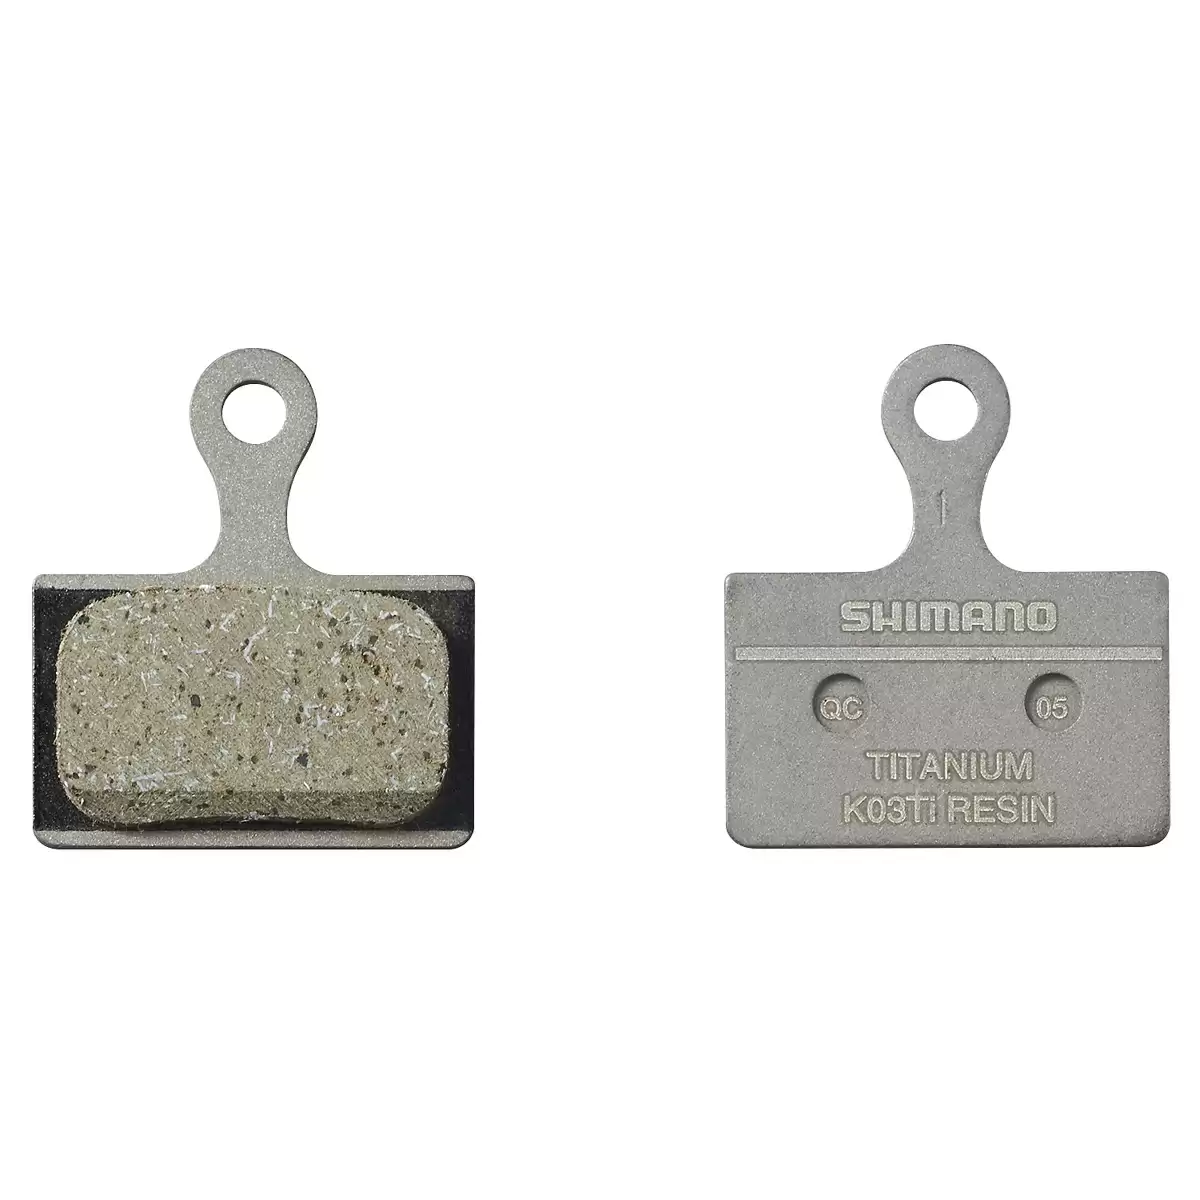 Resin pads K03Ti for Shimano Road and XTR 9100 from 2019 - image